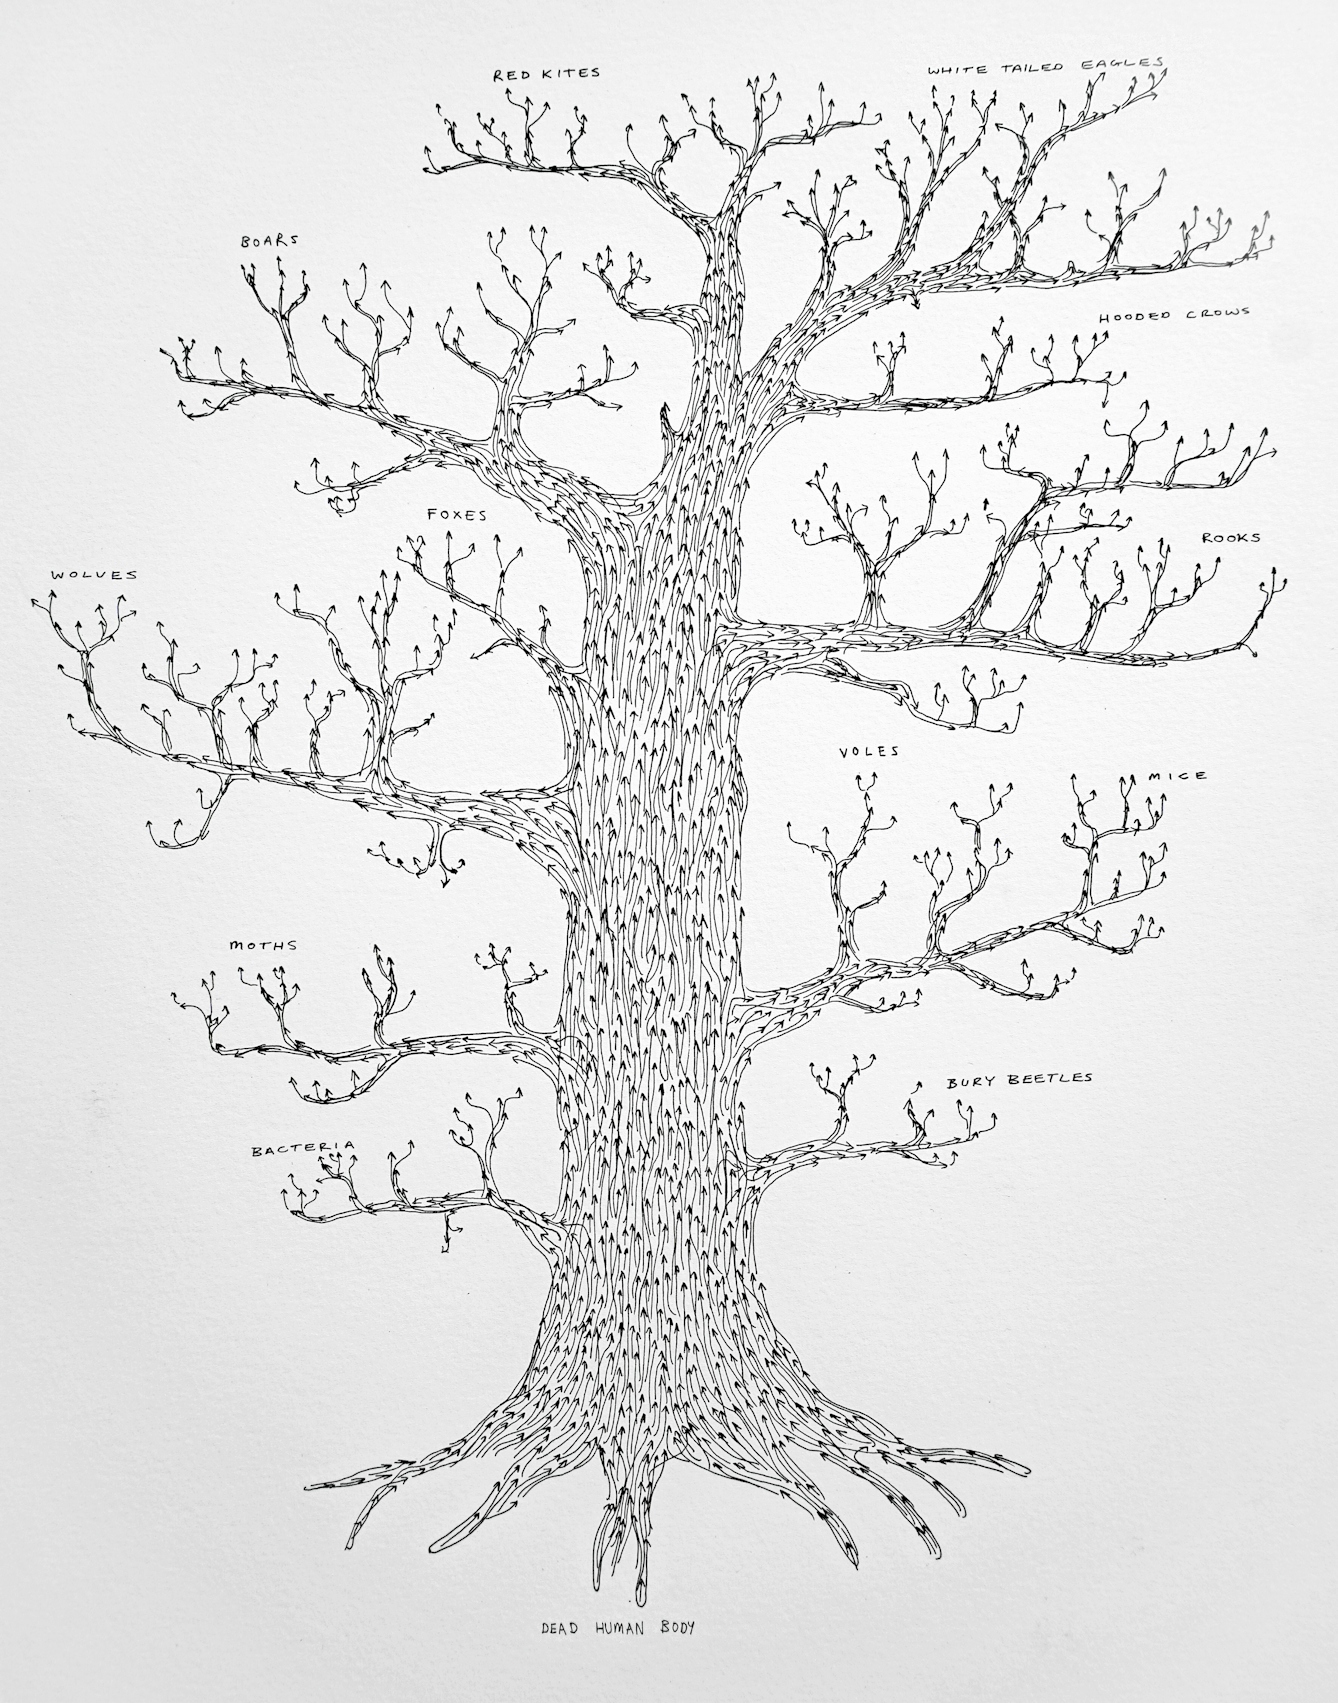 Pen and ink illustration on white textured paper. The illustration depicts a tree with roots, trunk and branches, but no leaves. The form is made up of lots of arrows pointing upwards. At the end of each branch are the names of various insects and animals, such as 'bury beetles' and 'foxes'.